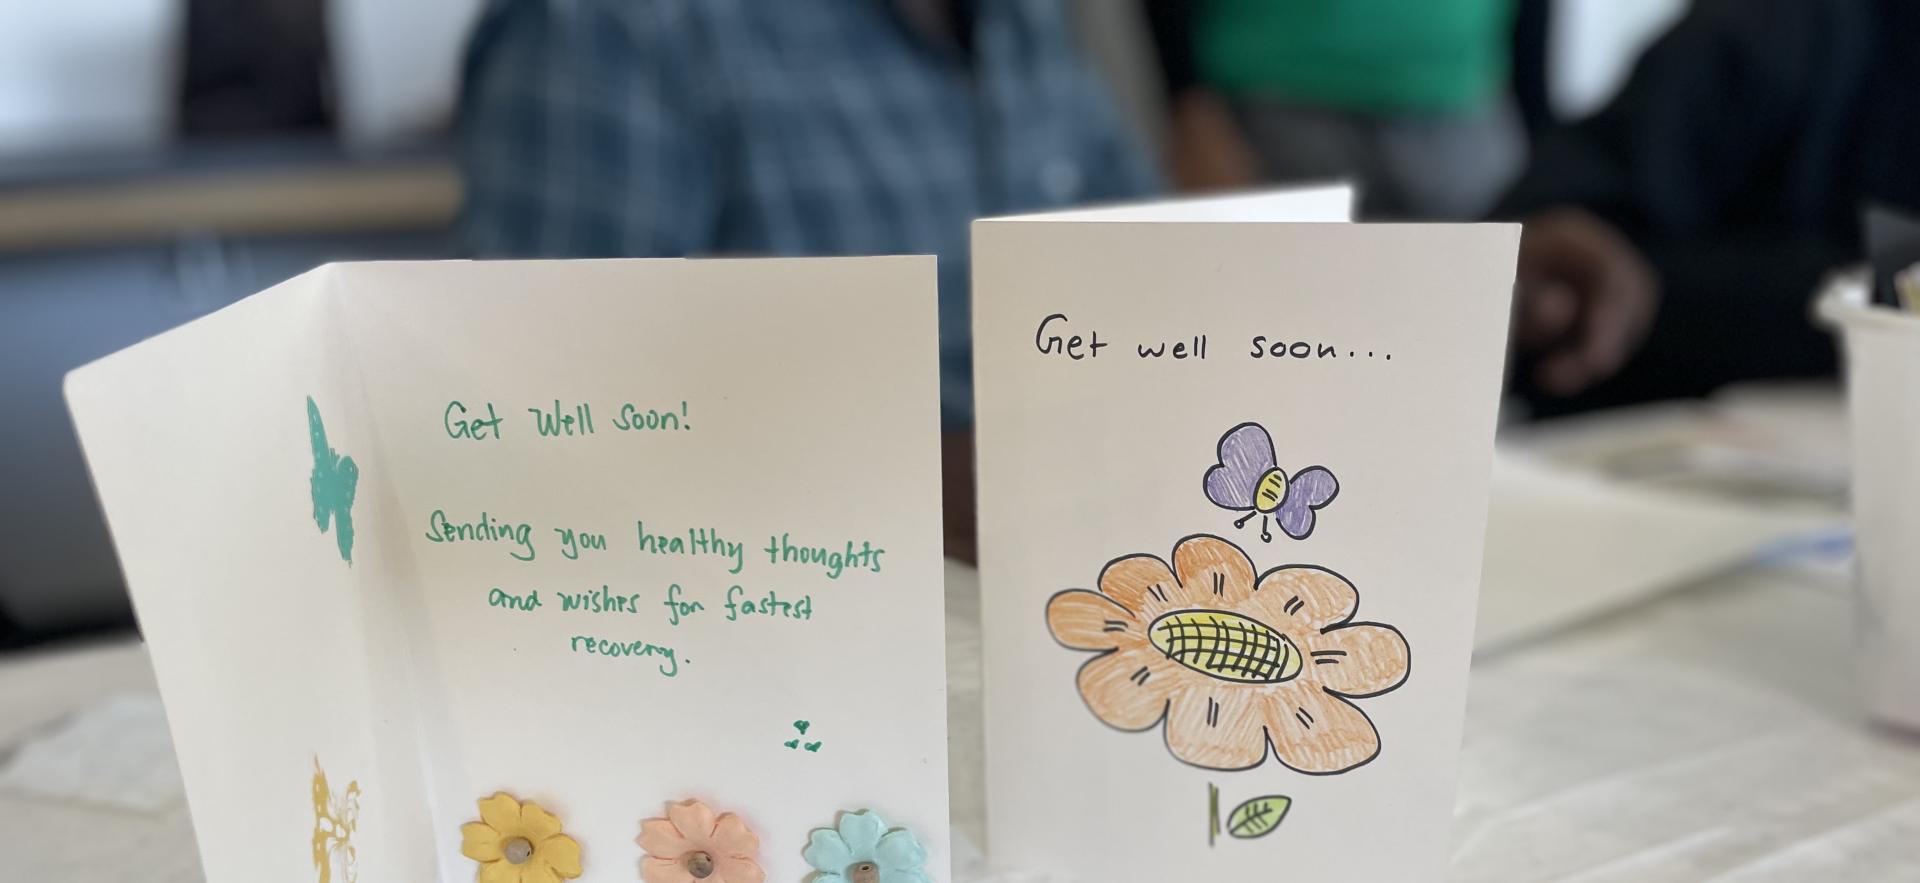 two get well cards, one is open wit words Get Well soon and one card with just the cover showing that states get well soon